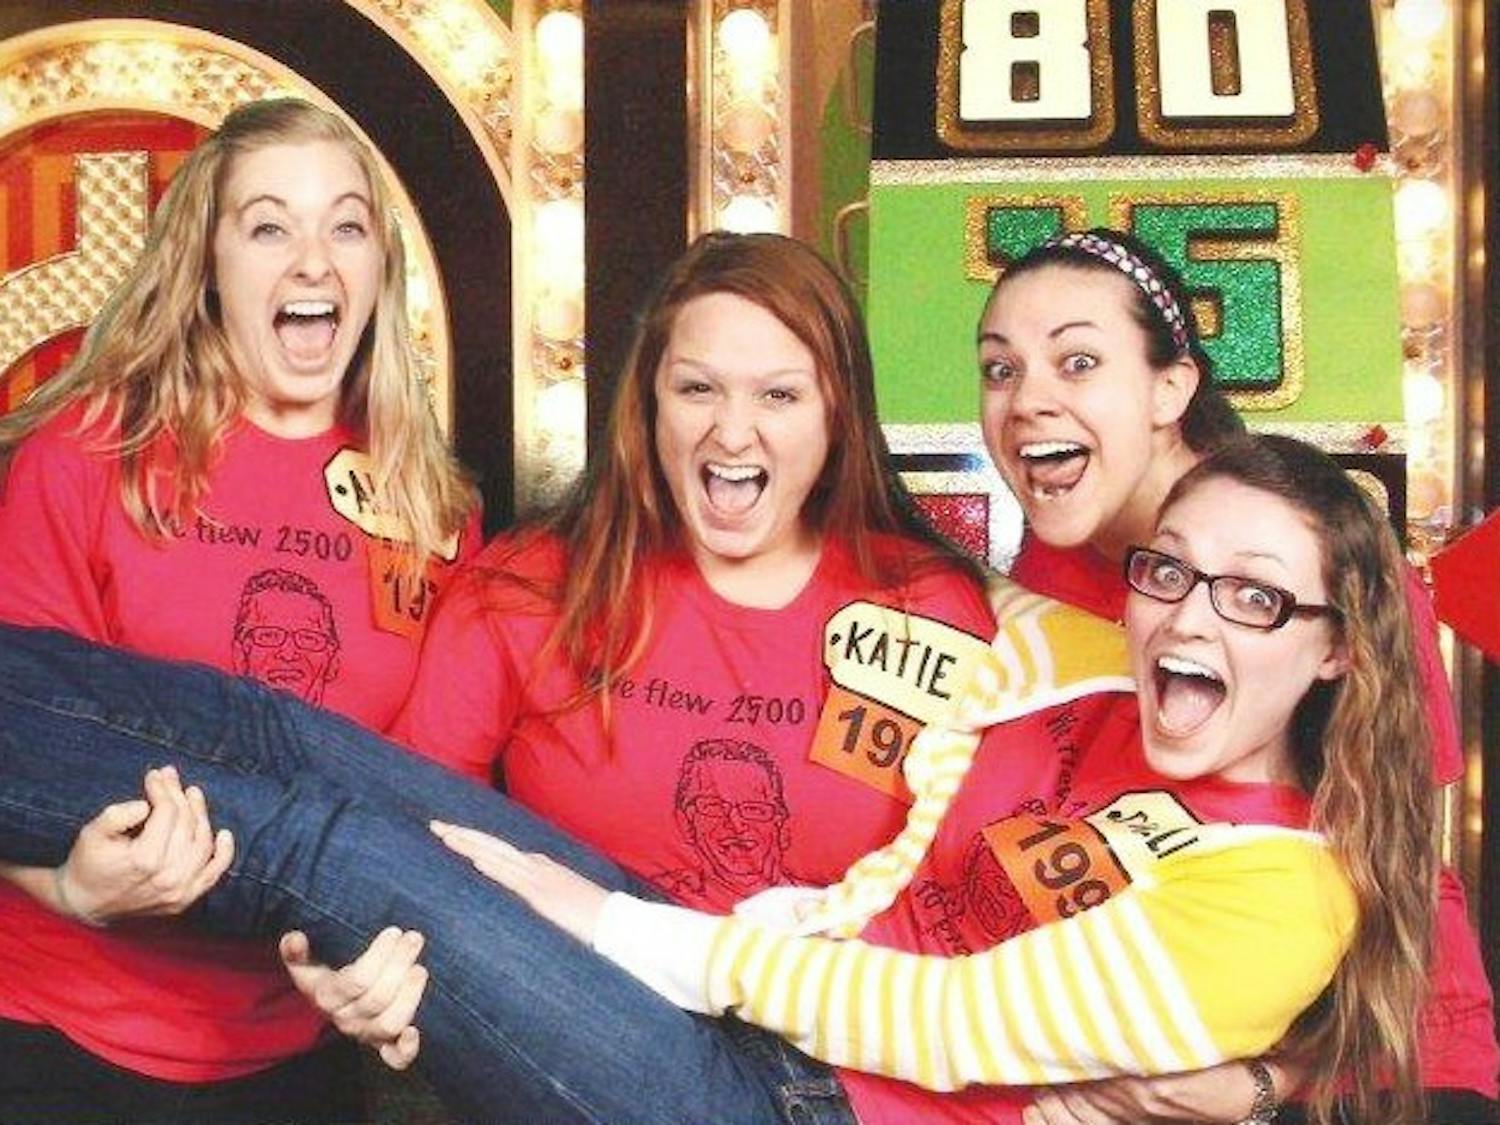 	Allison Presnell (left), Katie Traylor (middle), and Ashley Campbell hold Danielle Schlafer before going into the Price is Right studio. Traylor won $10,000.

	Courtesy of Katie Traylor